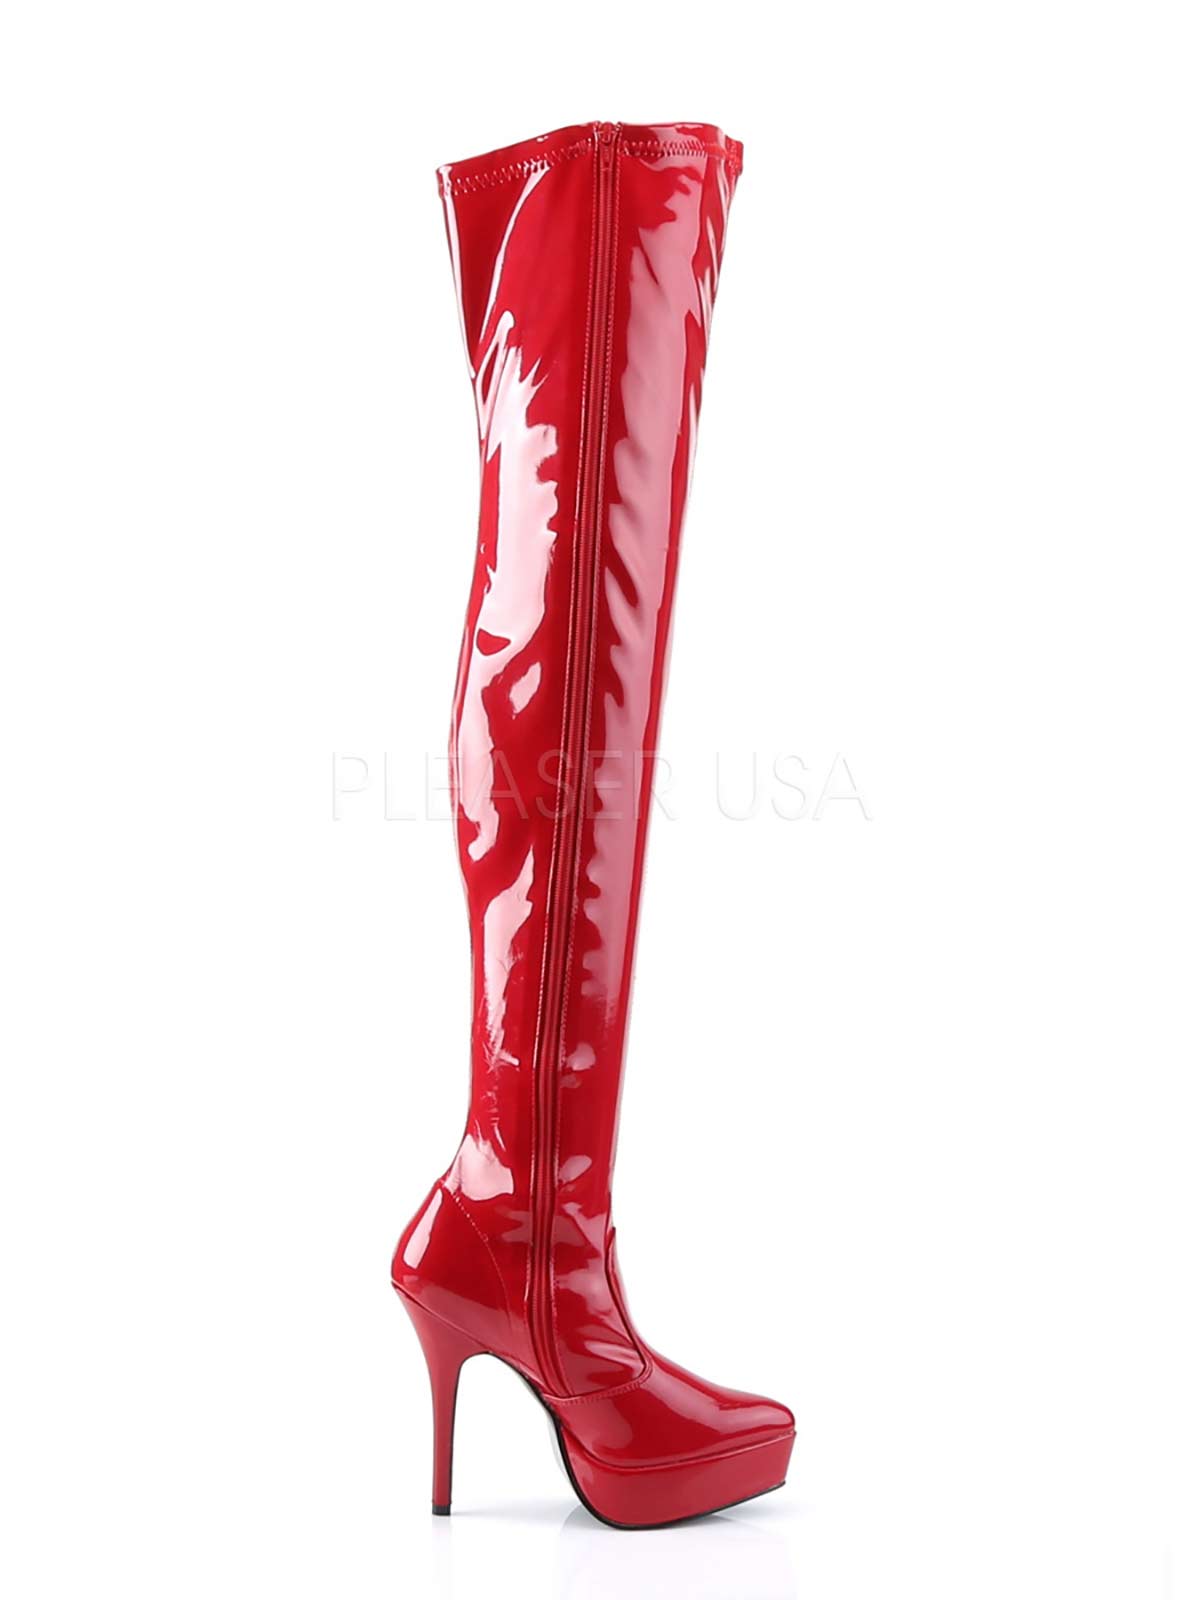 Lackstiefel, Stiefel, Lack stiefel, rote Lackstiefel, Lack, overknee, Lackstiefel, Damenlackstiefel, Überkniestiefel, Stretchstiefel, Lack-rot, roter Stiefel, lackrot, rot, rote Stiefel, lange